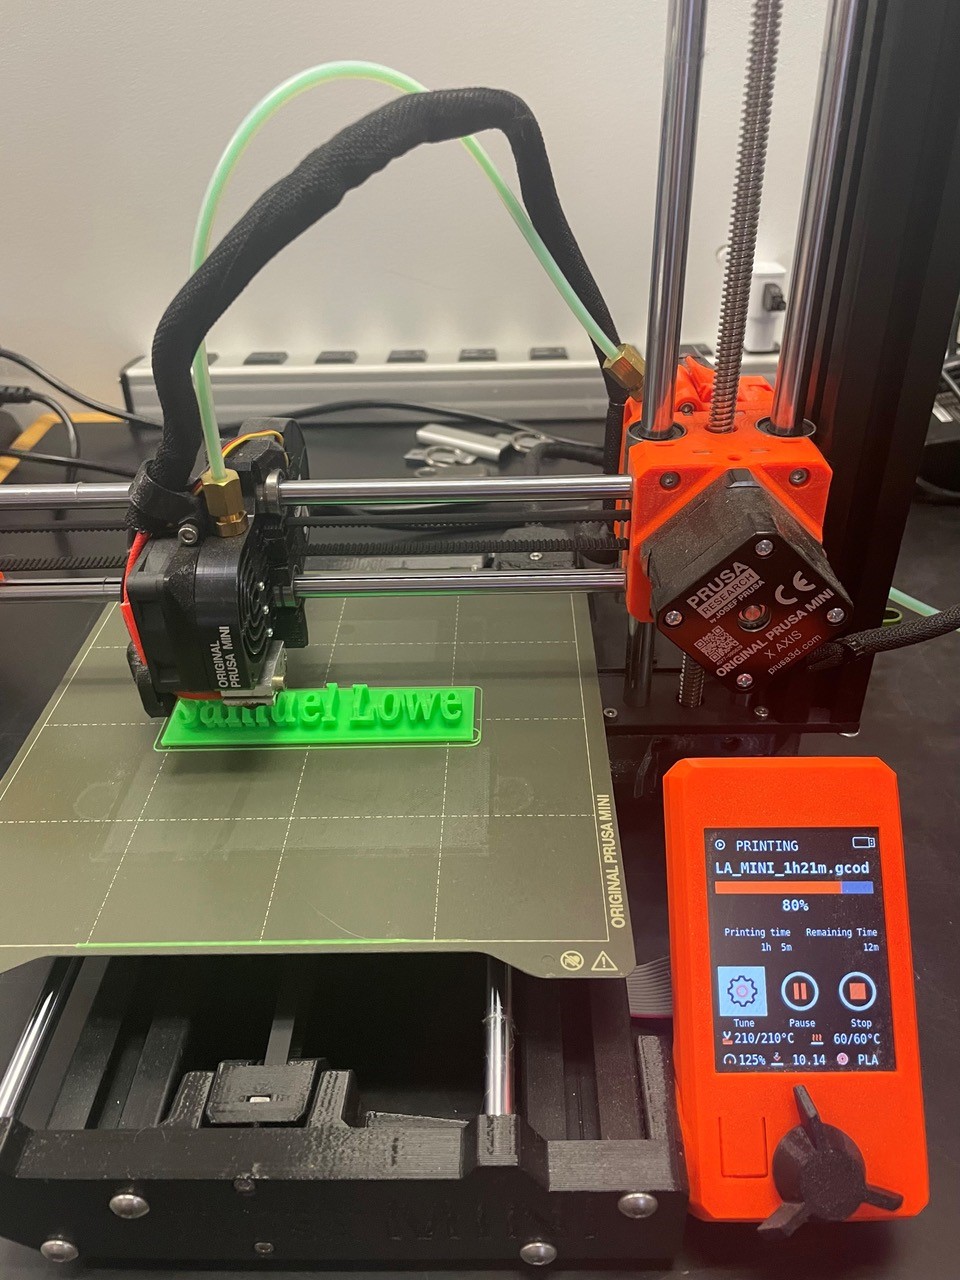 Students attending SCORE’s intermediate 3D printing and design camp learned to import fonts into Tinkercad and used the duplicate feature to give printed nametags a multi-dimensional appearance.